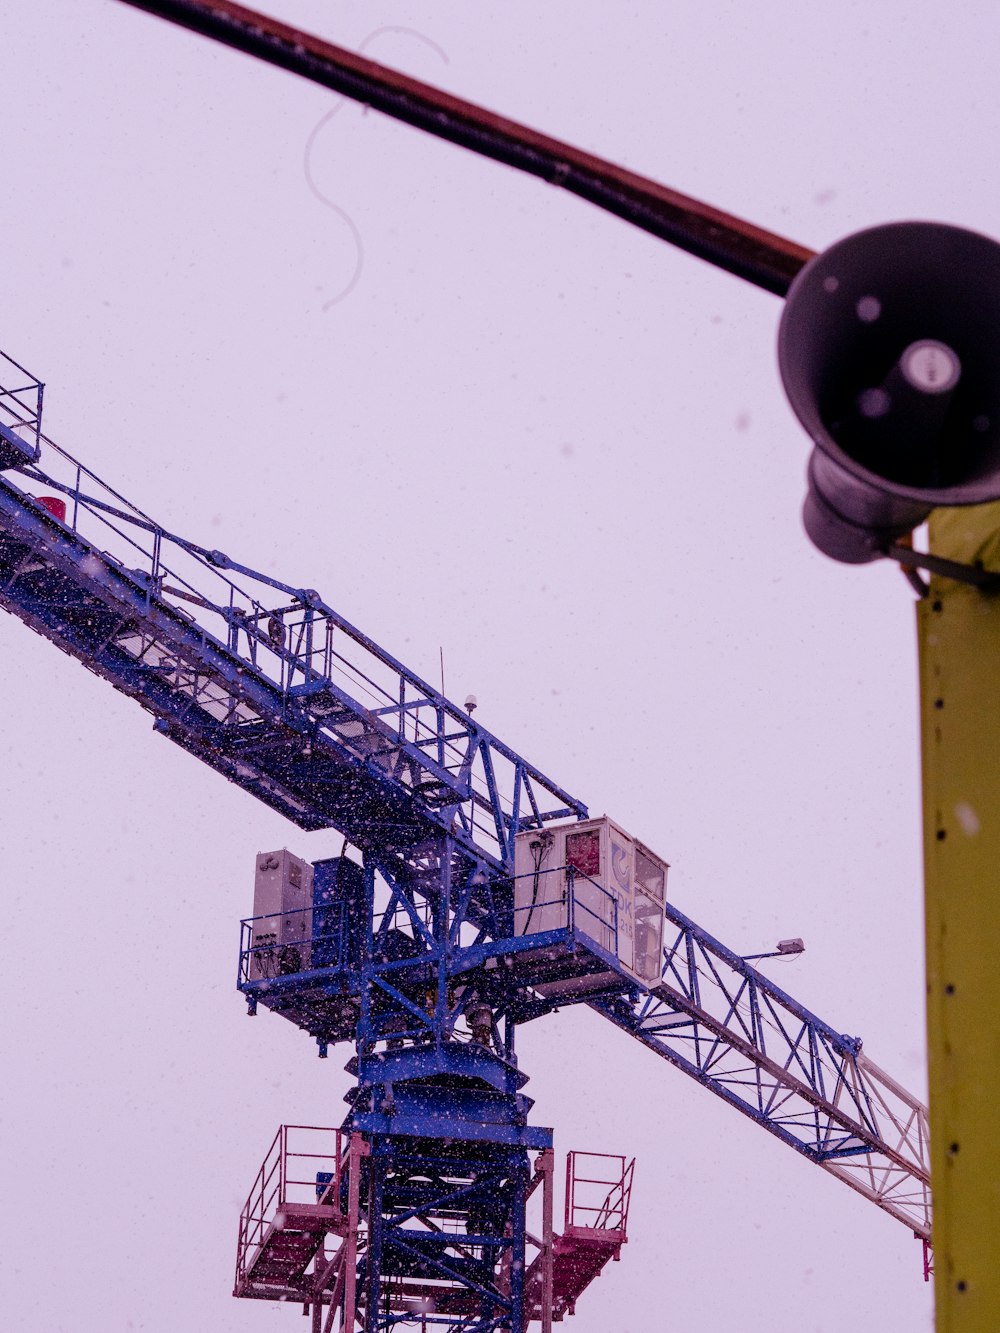 a large crane is sitting on top of a pole